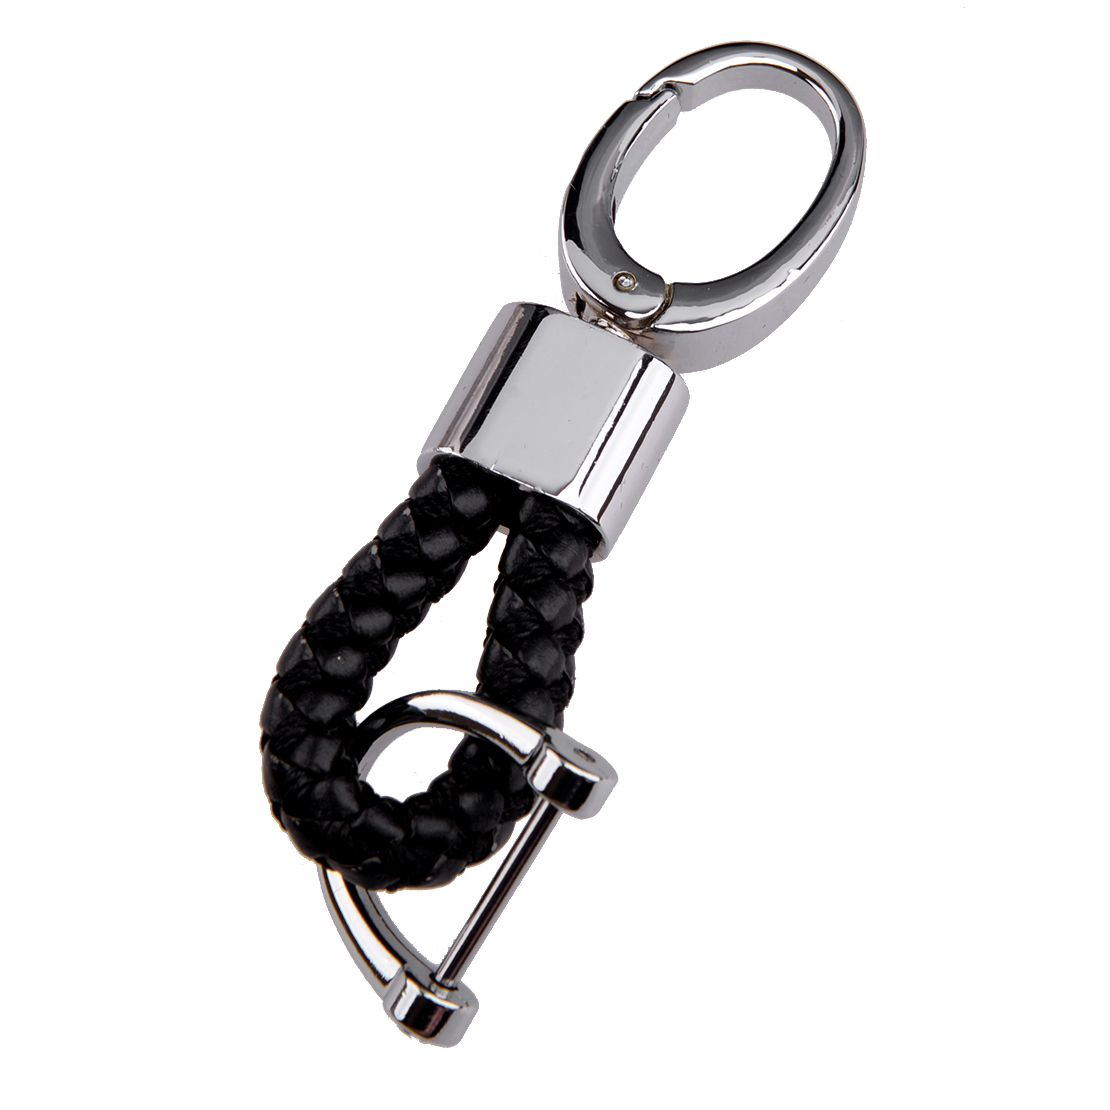 1x Vehicle Car Keychain Key Chain Key Ring Key Fob Leather Rope Strap Weave New 